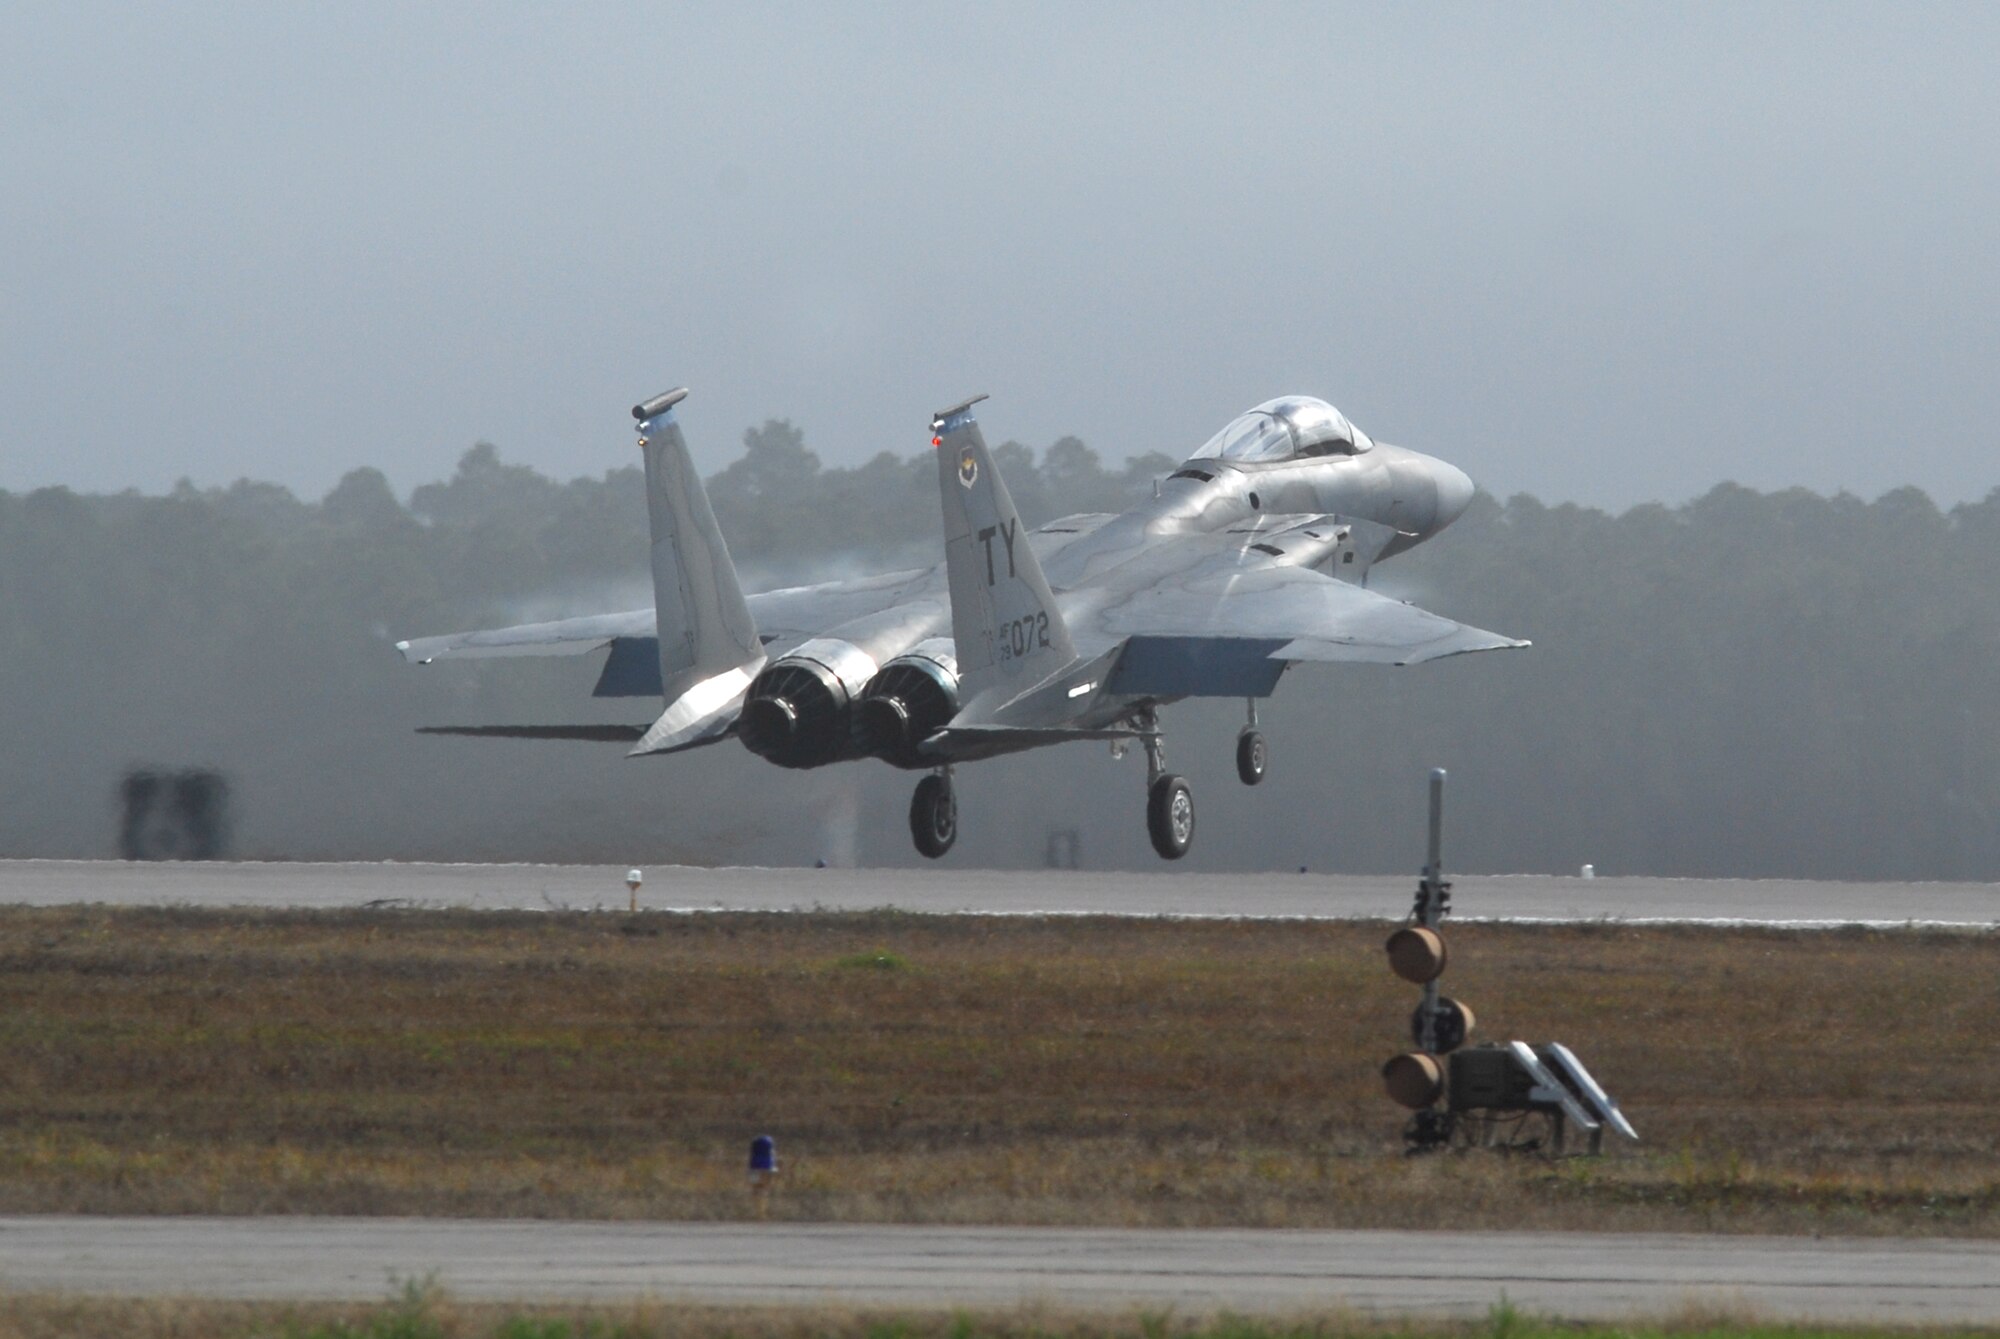 Capt. Dave Christensen, 95th Figther Squadron Flight C commander, takes off in the F-15C/D tail 072 at 10.08a.m. Jan. 9.  This is the first F-15 C/D to take off at Tyndall Air Force Base since the stand down had been given Nov. 3, 2007.  (Photo by Lisa Norman)